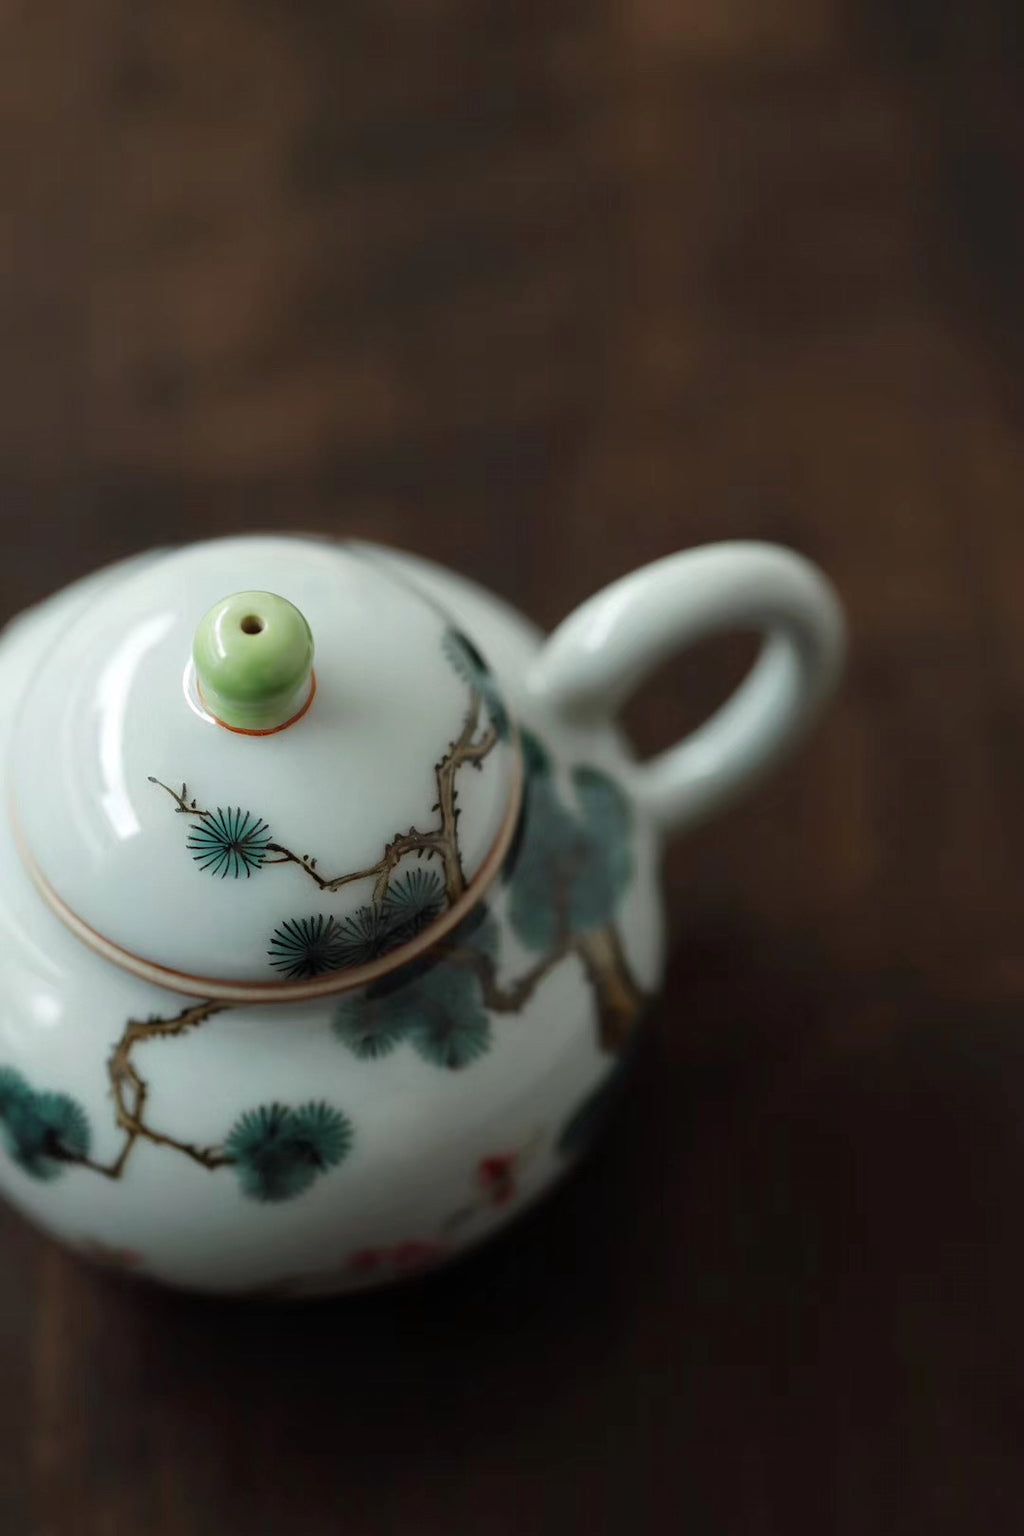 Chinese Hand Painting Vintage Chaozhou Tea Gongfu Teapot|Best Ceramics